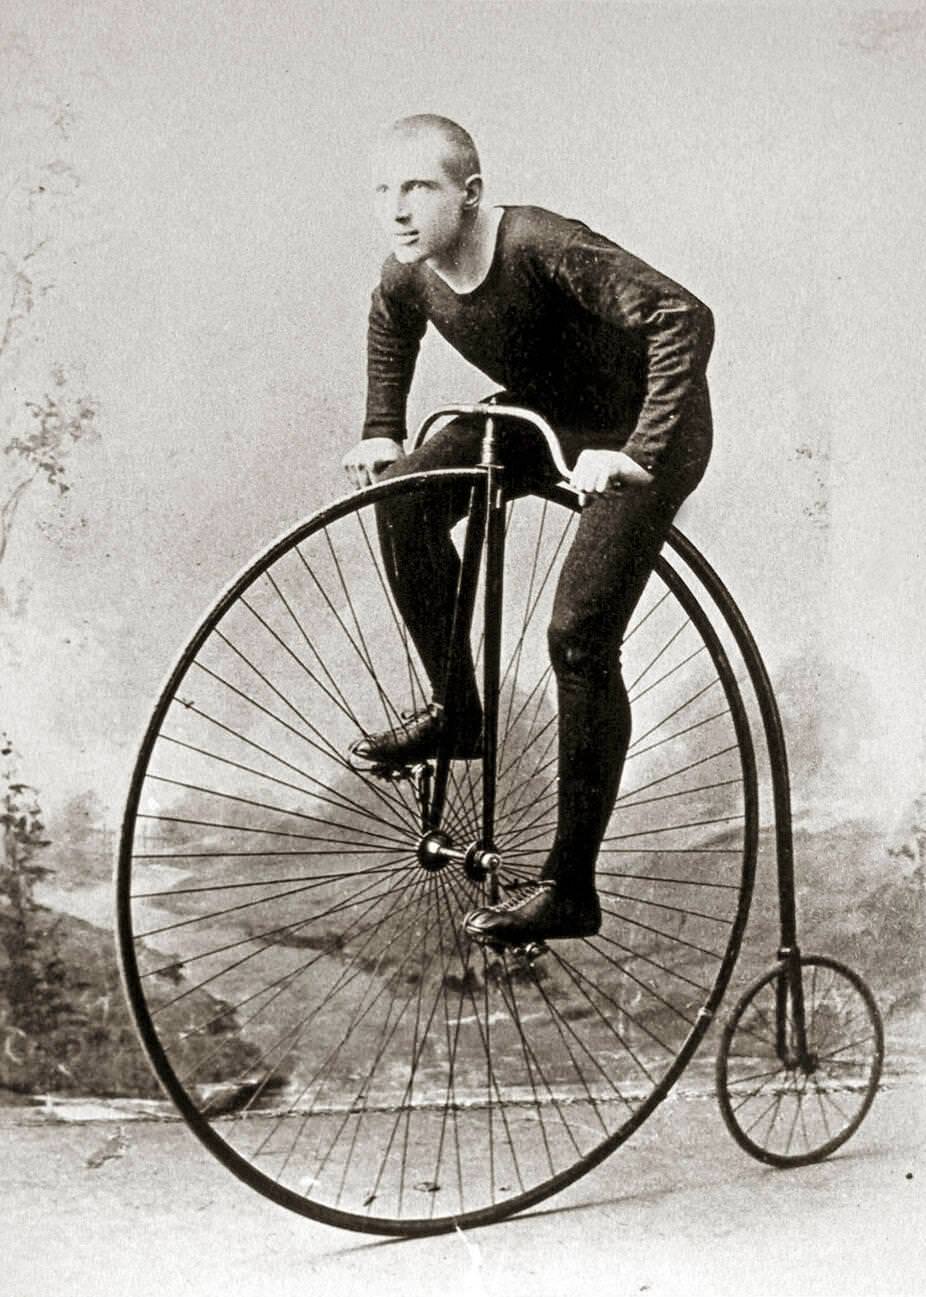 High wheel bicycle, circa 1905, location unknown, Germany.